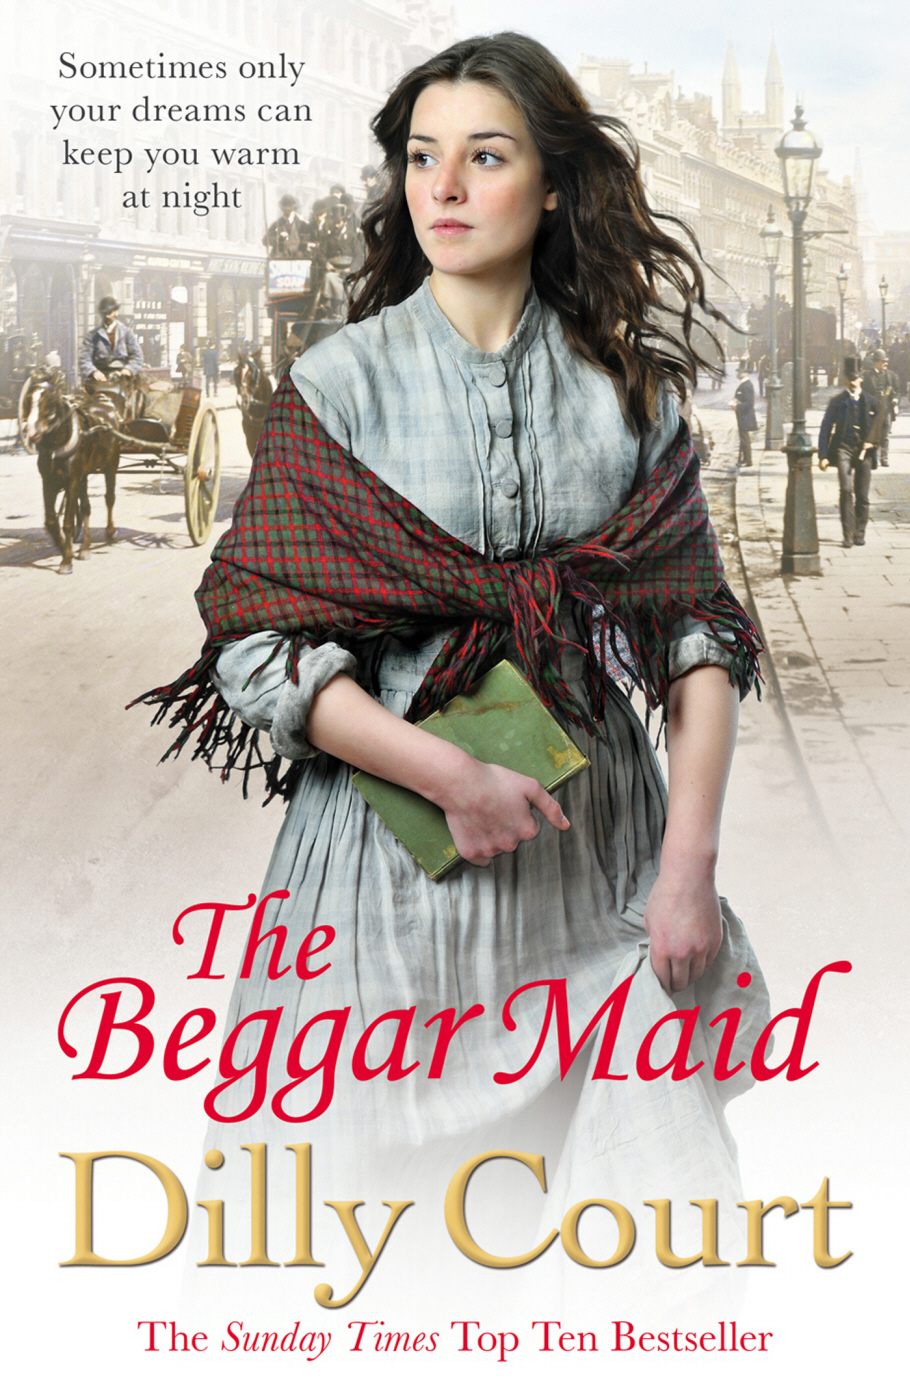 The Beggar Maid (2014) by Dilly Court